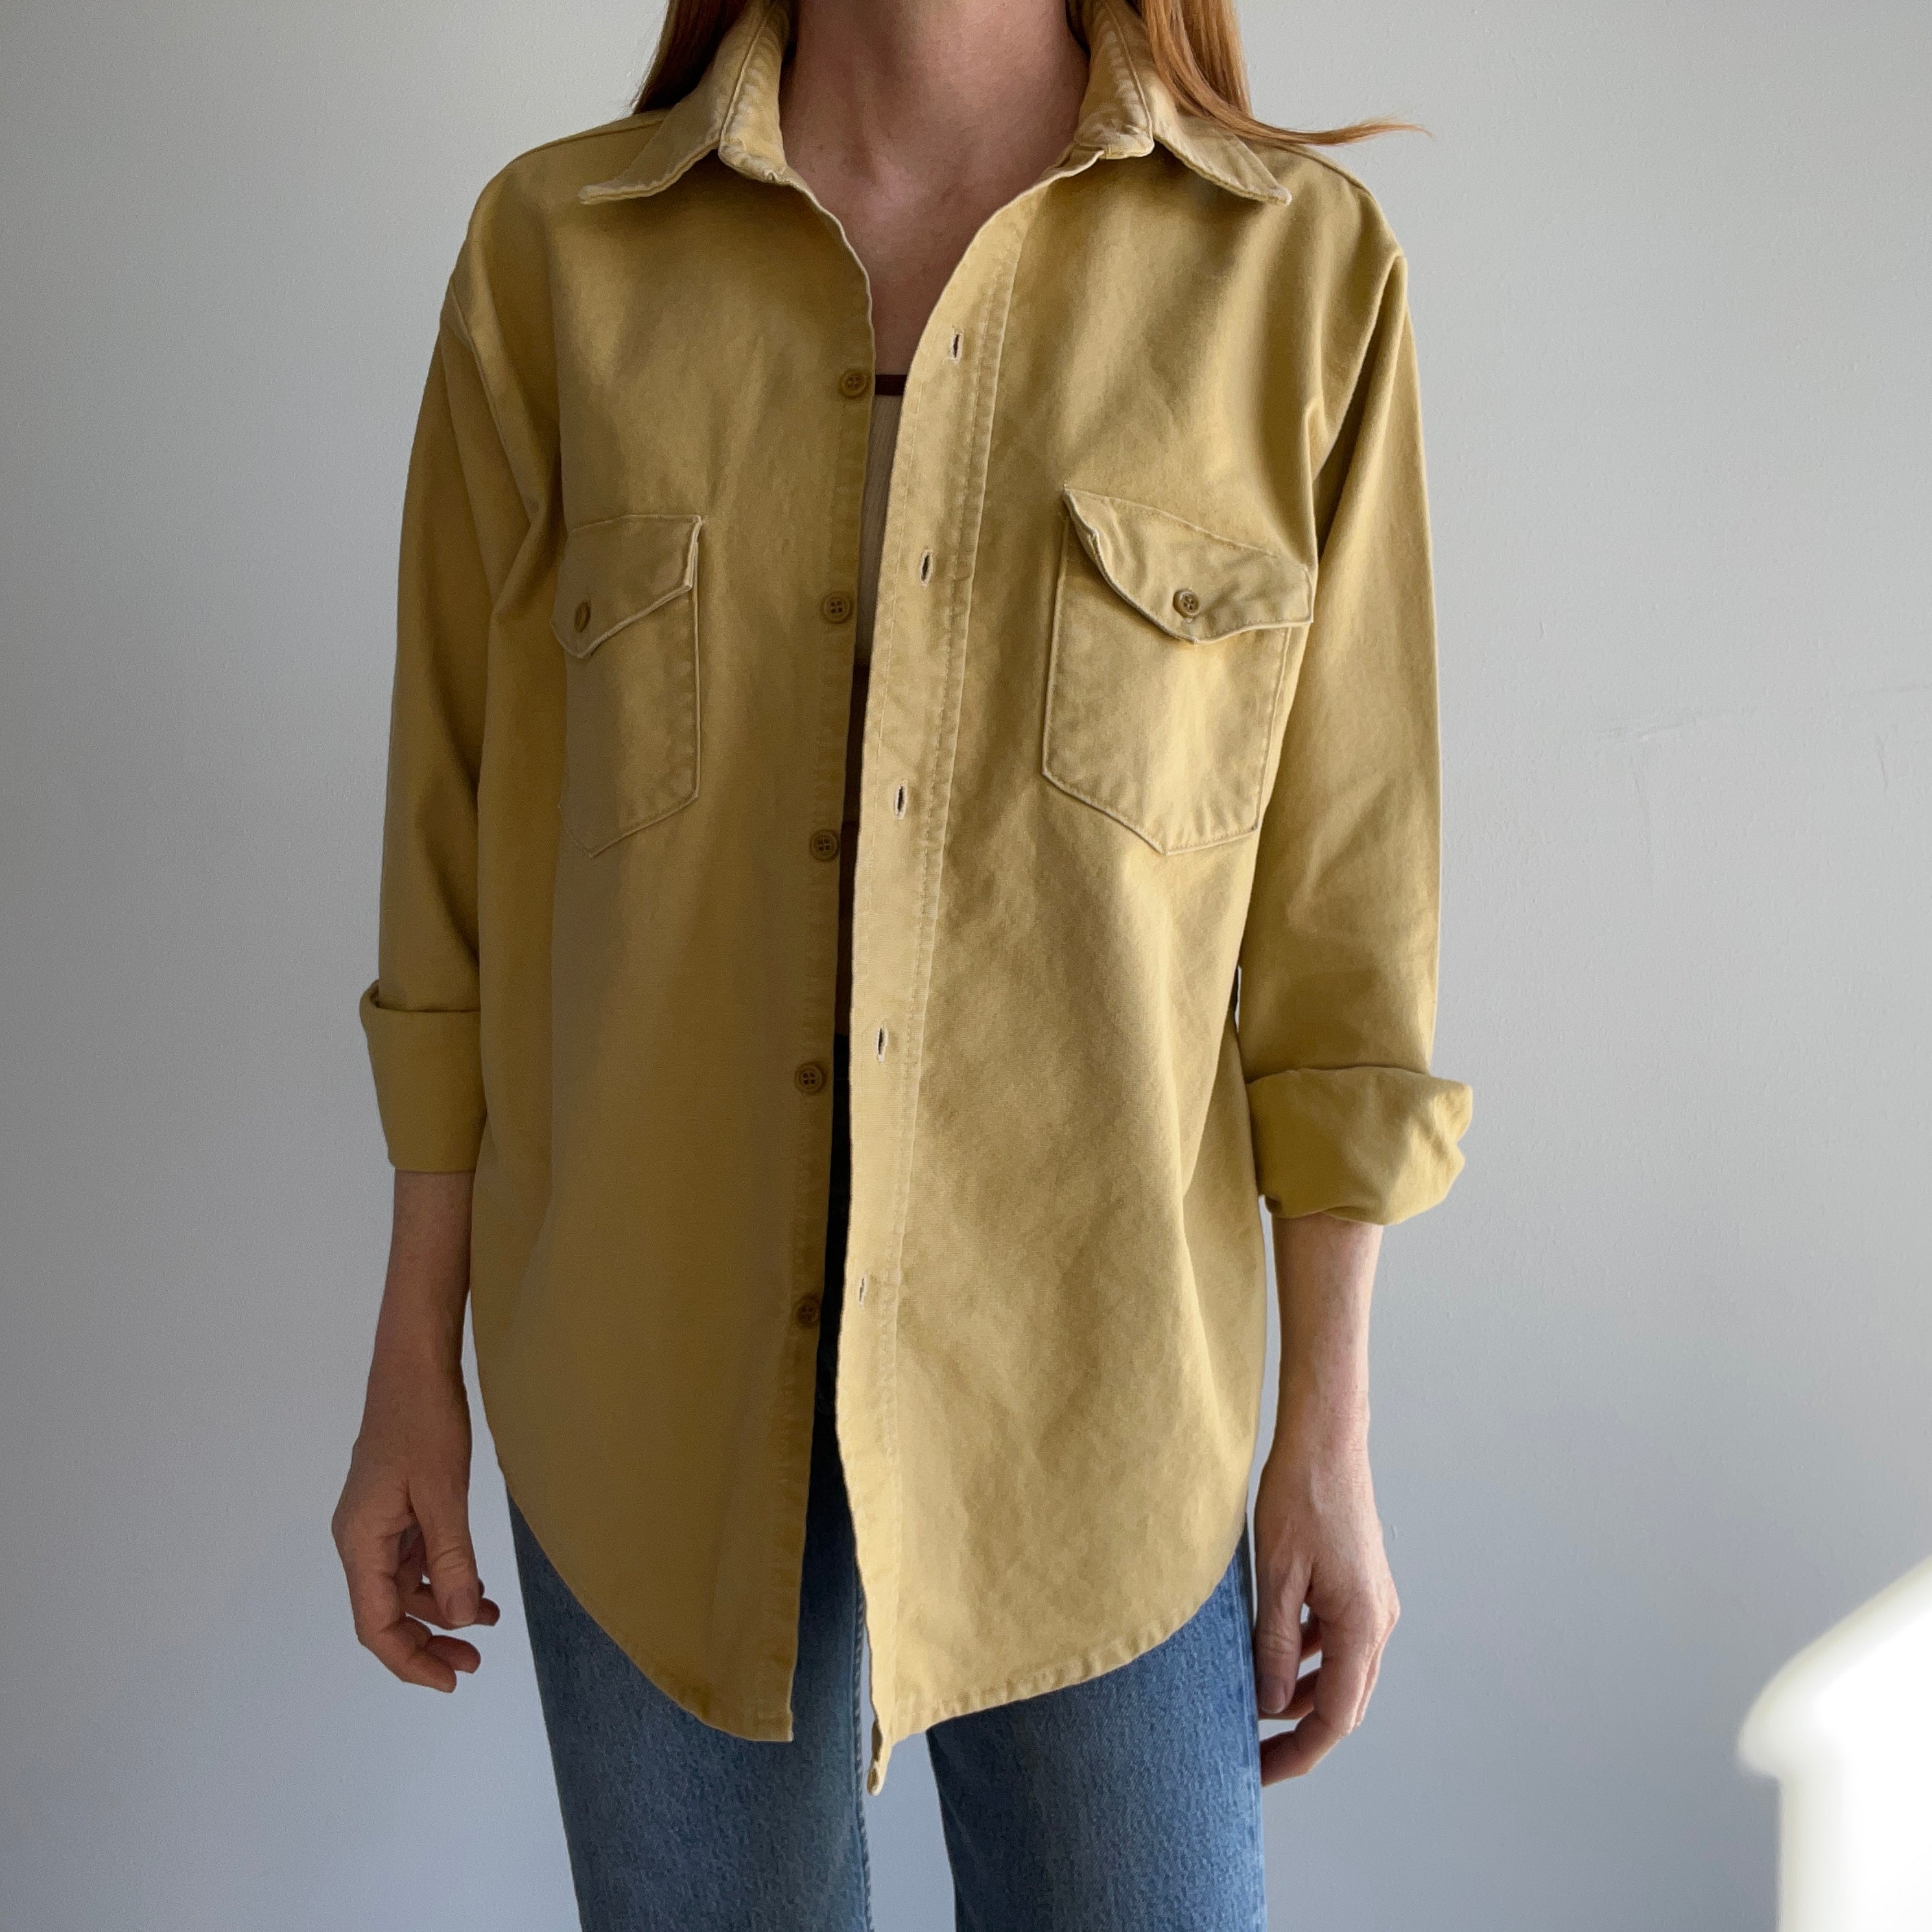 1970/80 Cotton Canvas Flannel Style Shirt - WOW